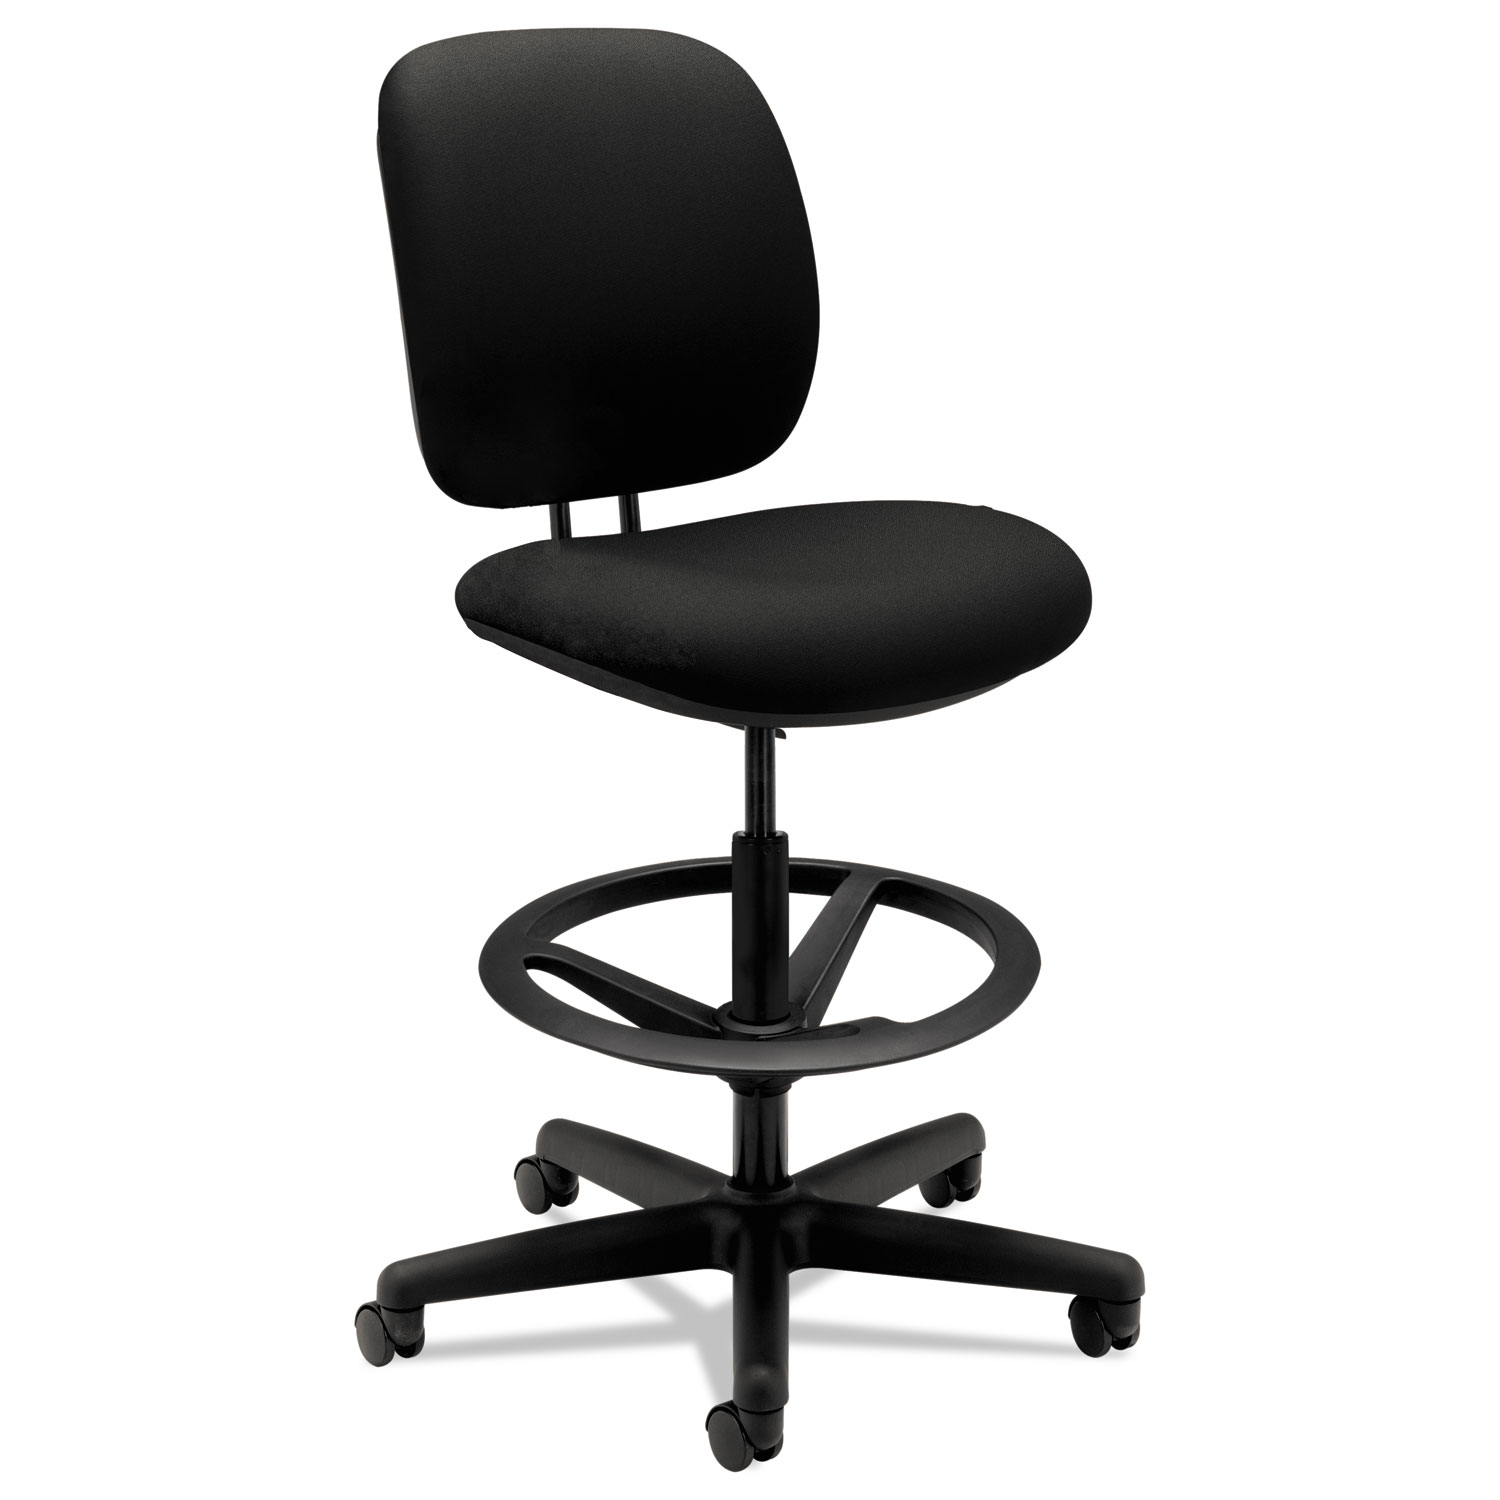  HON H5905.H.CU10.T ComforTask Task Stool with Adjustable Footring, 32 Seat Height, Supports up to 300 lbs, Black Seat/Back, Black Base (HON5905CU10T) 